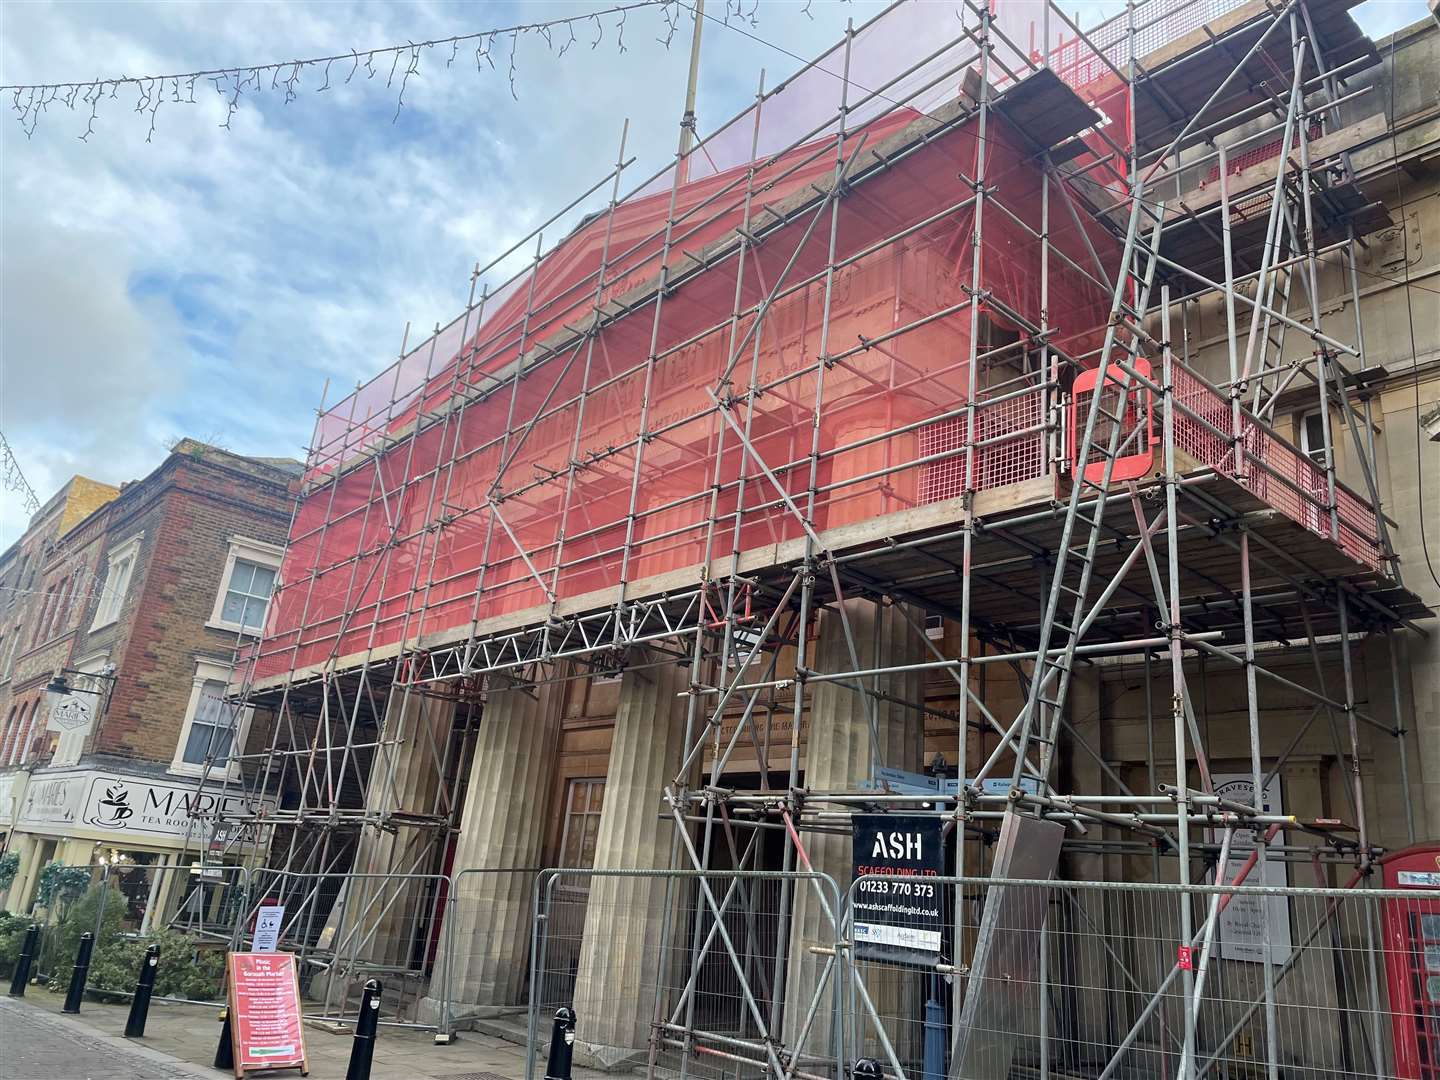 Scaffolding was erected around the Old Town Hall to repair the roof